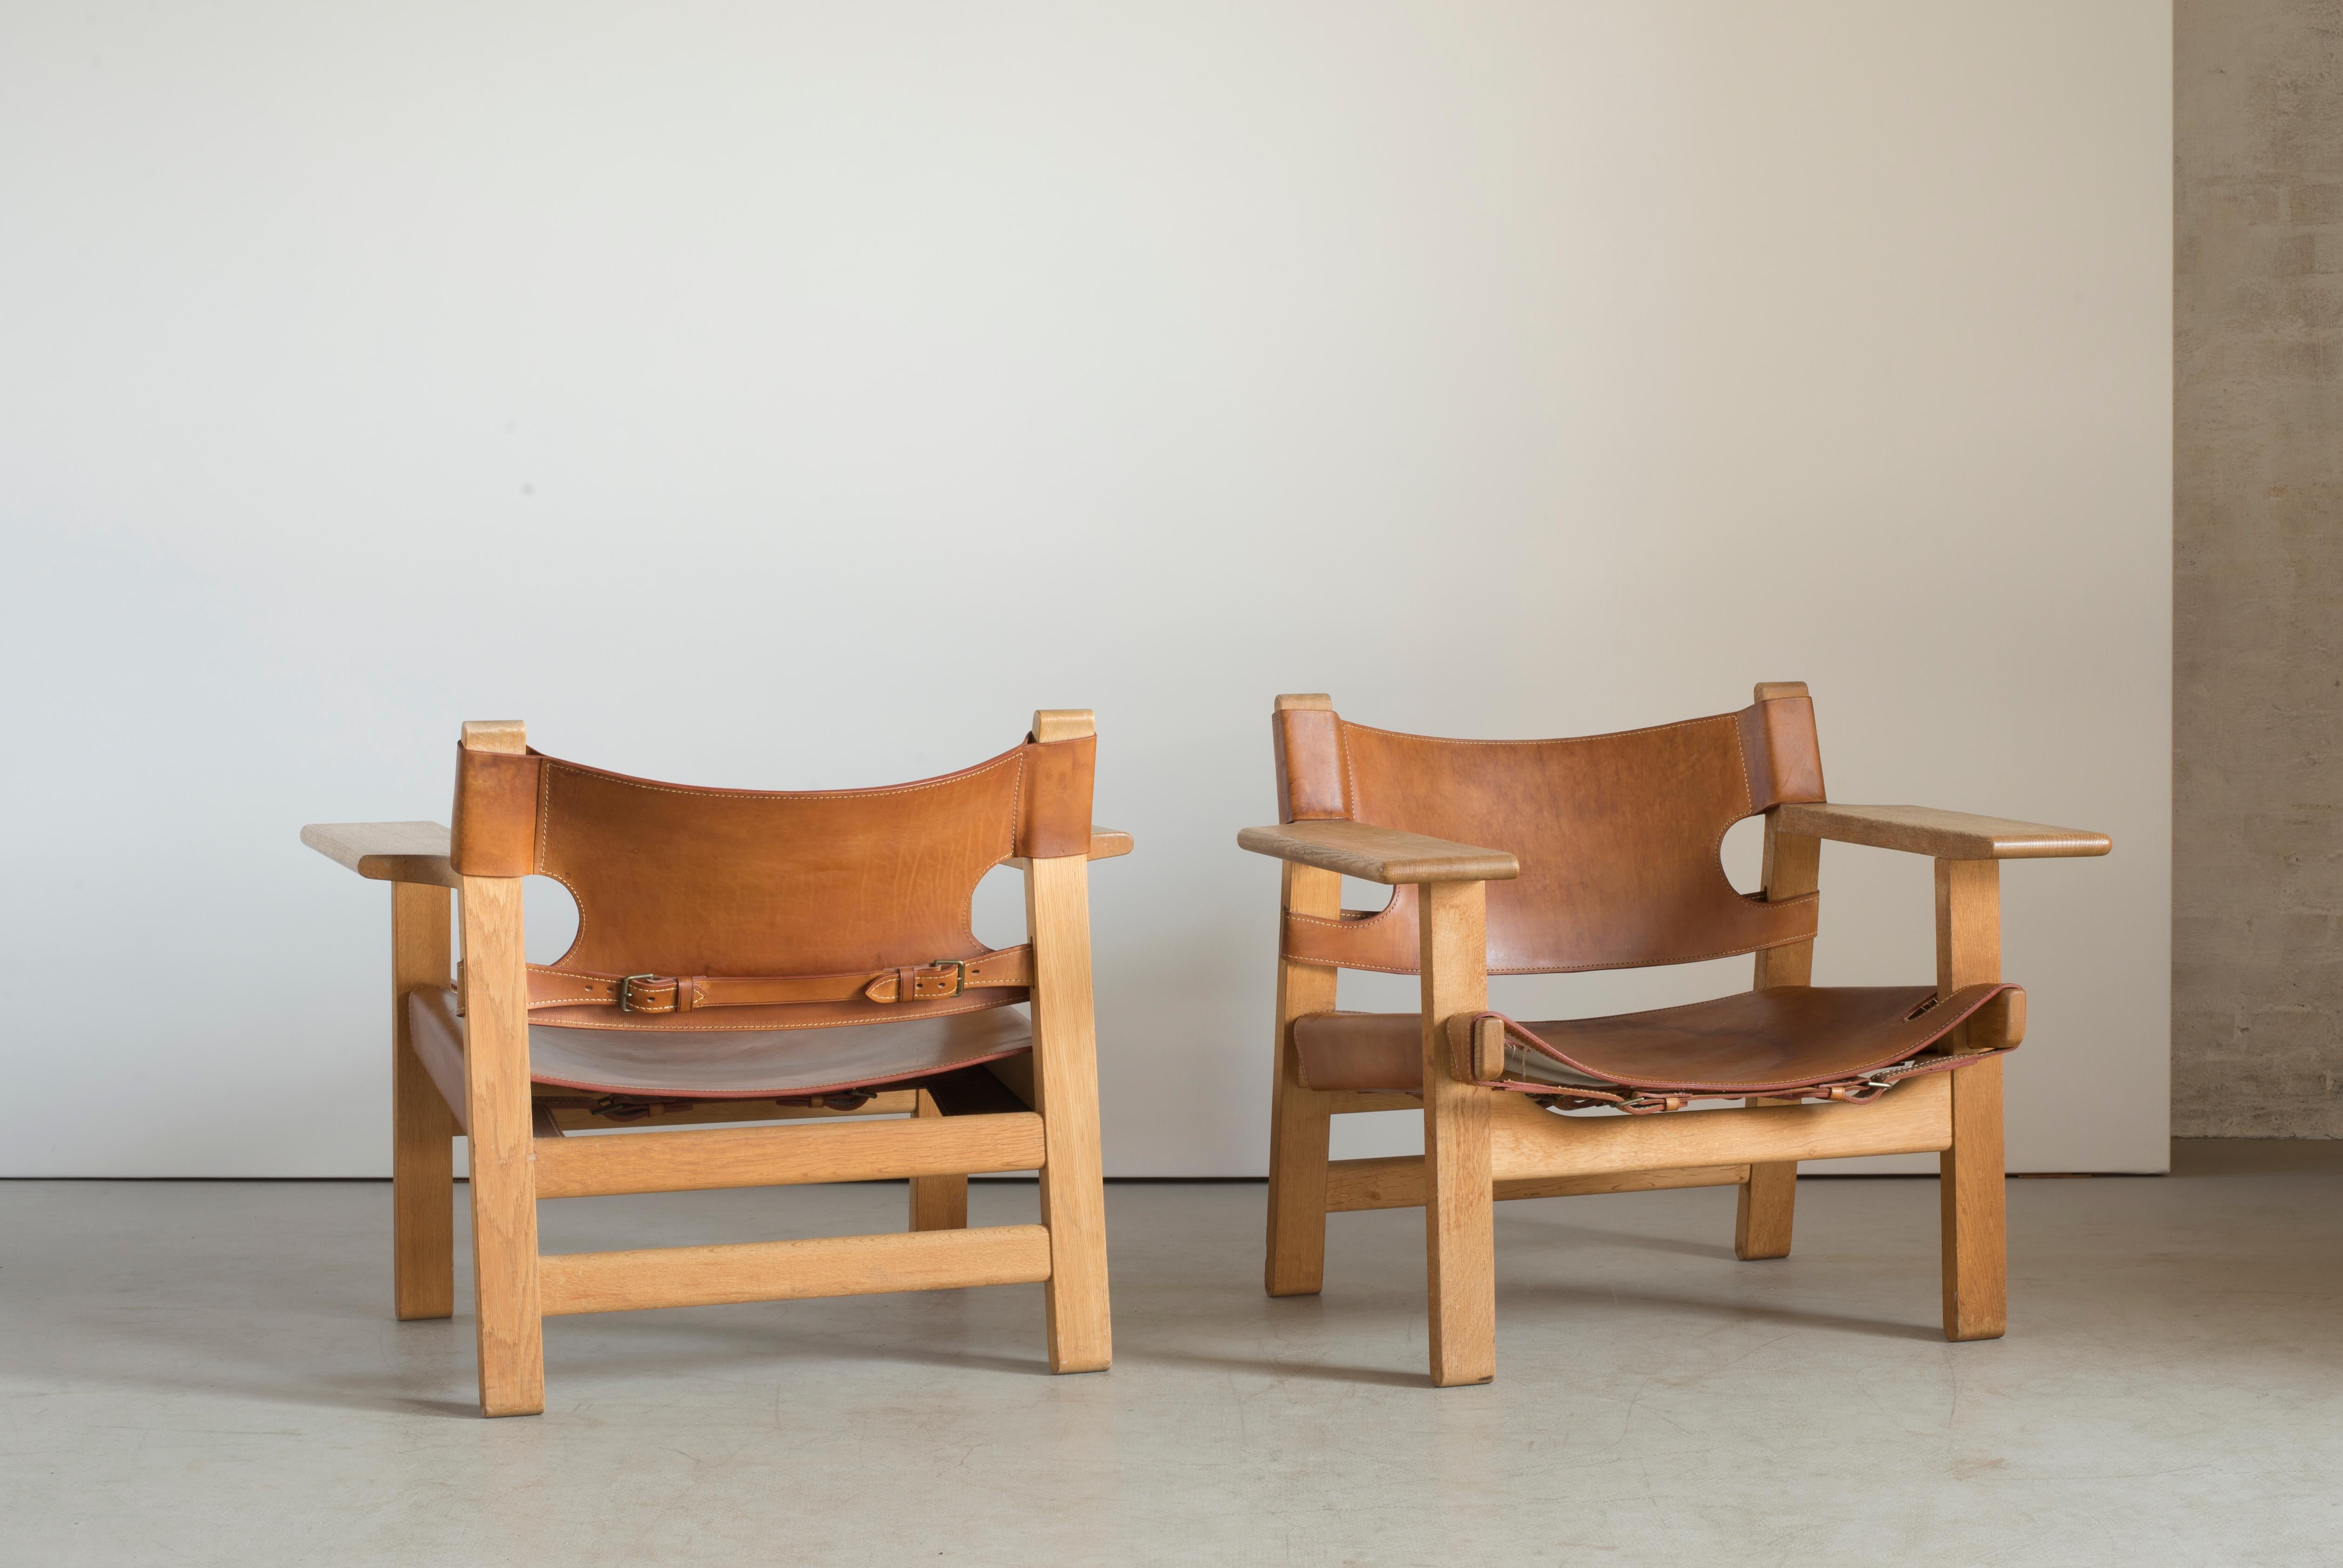 Børge Mogensen pair of Spanish chairs in oak and vegetable tanned leather. Executed by Fredericia Furniture, Denmark.